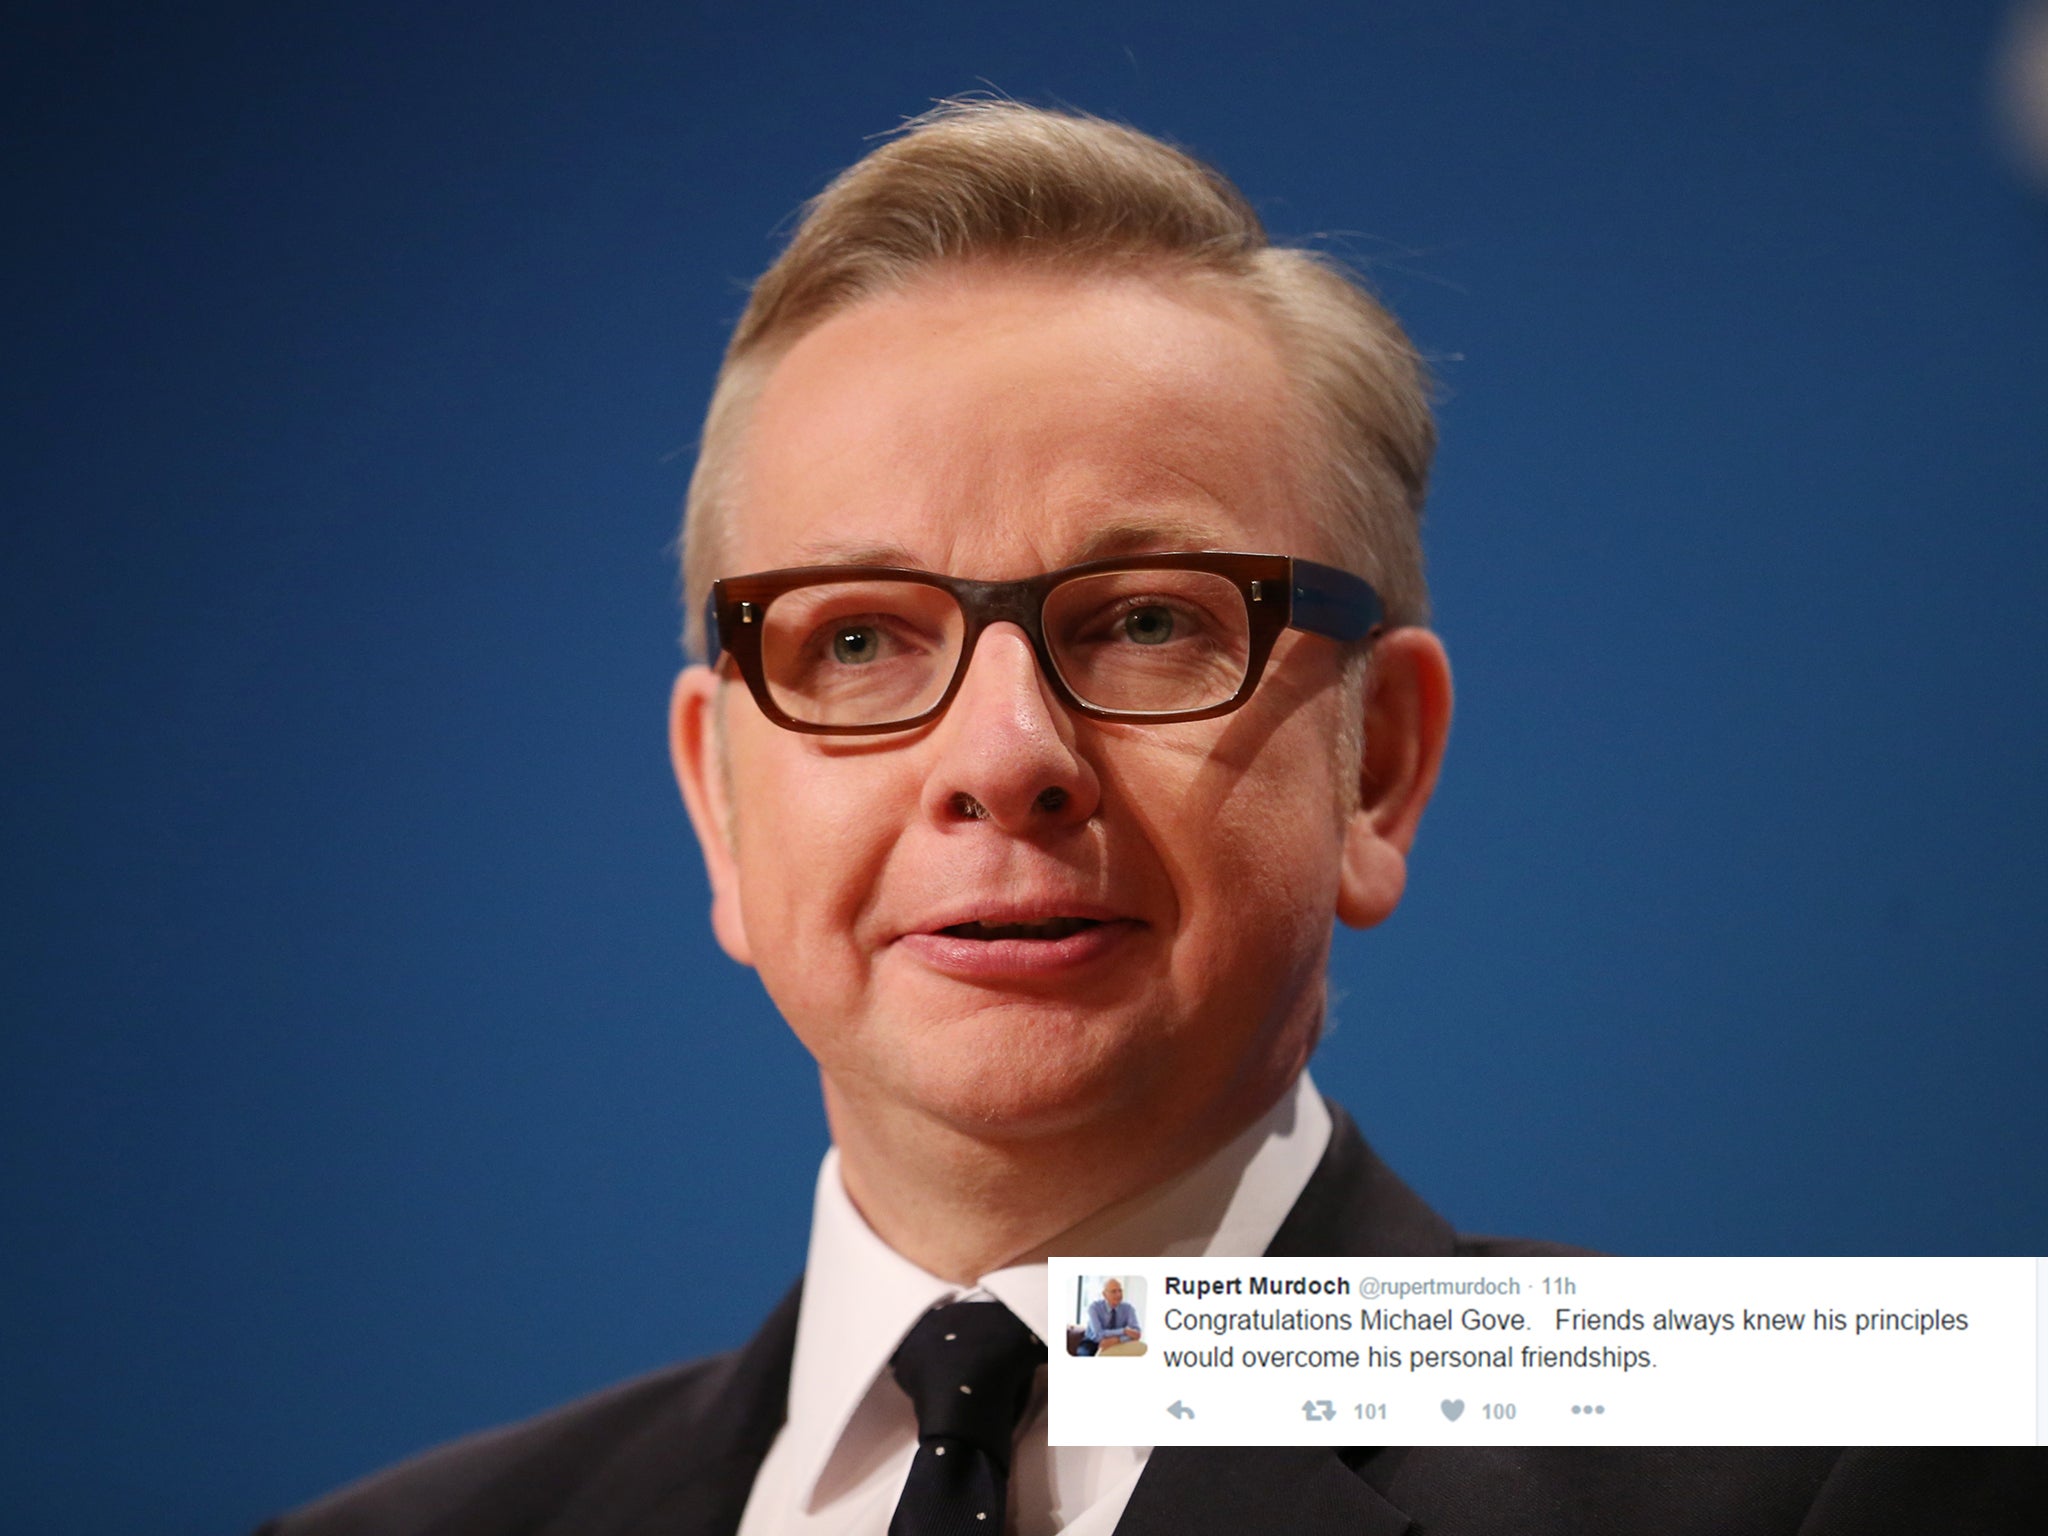 Murdoch praised Gove for sticking by his principles